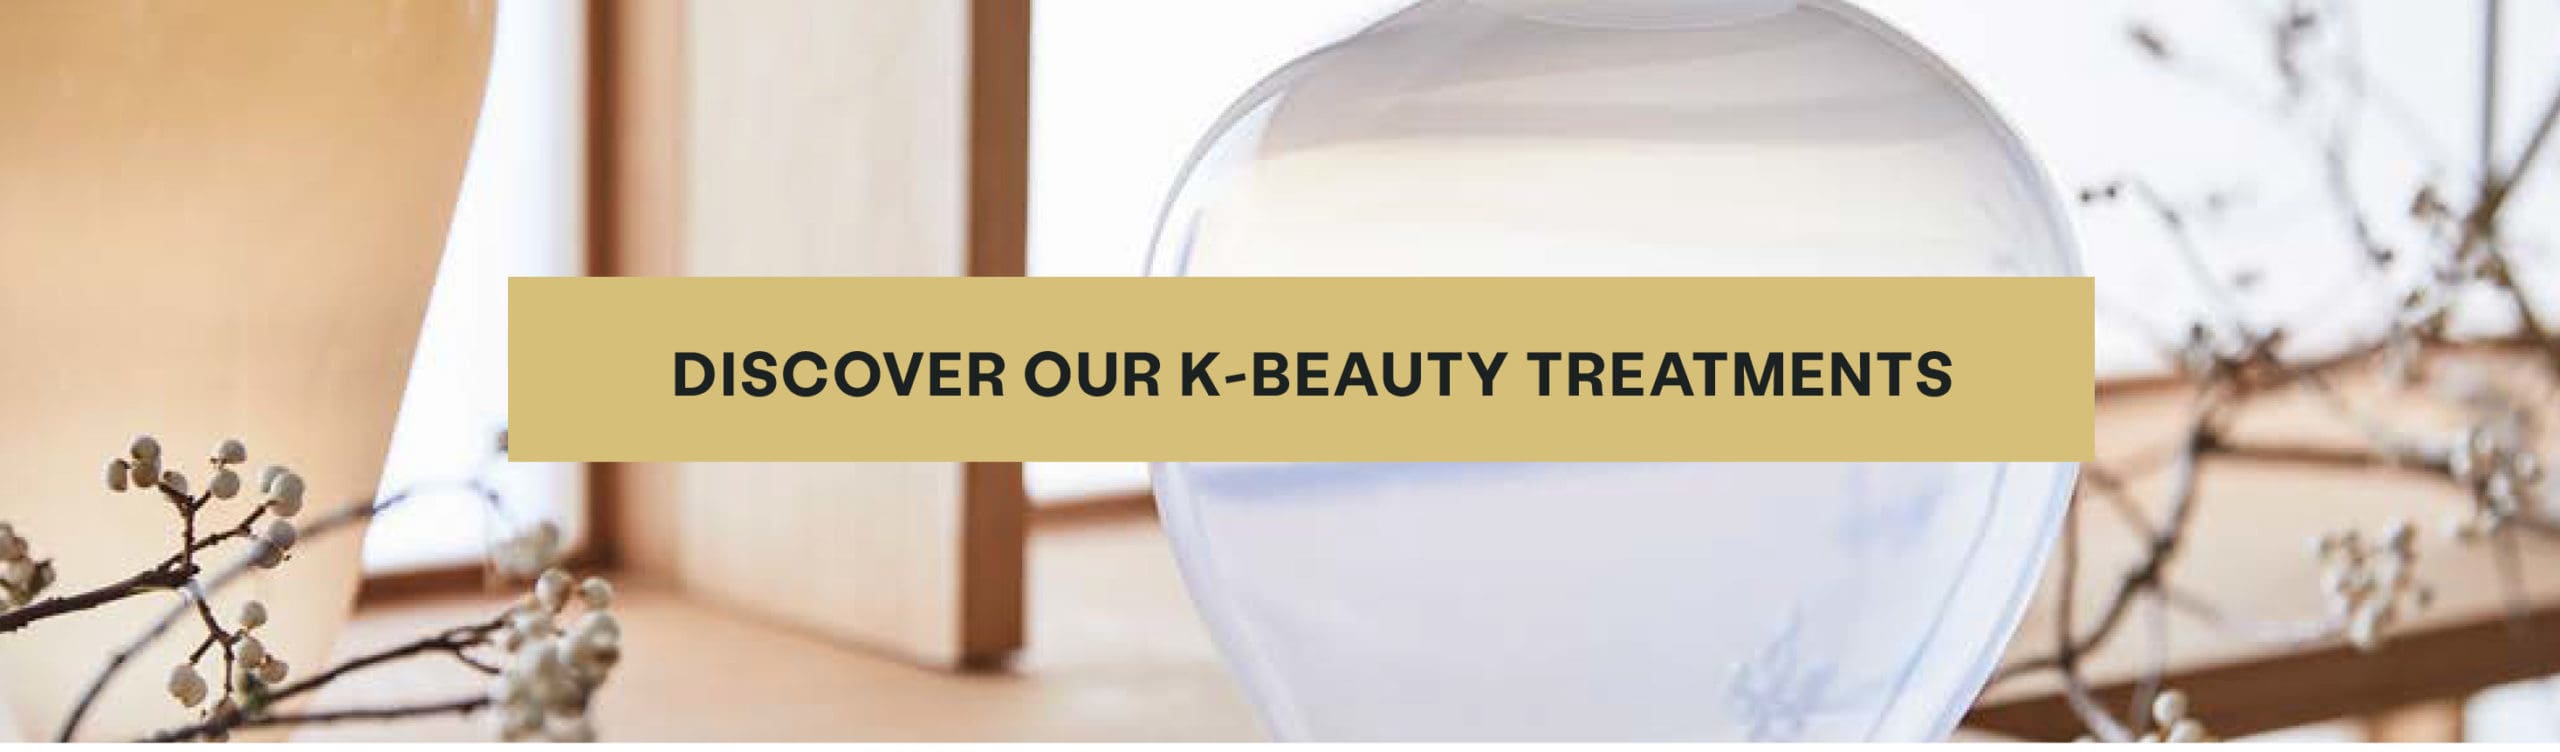 What Is Clinical K-Beauty?